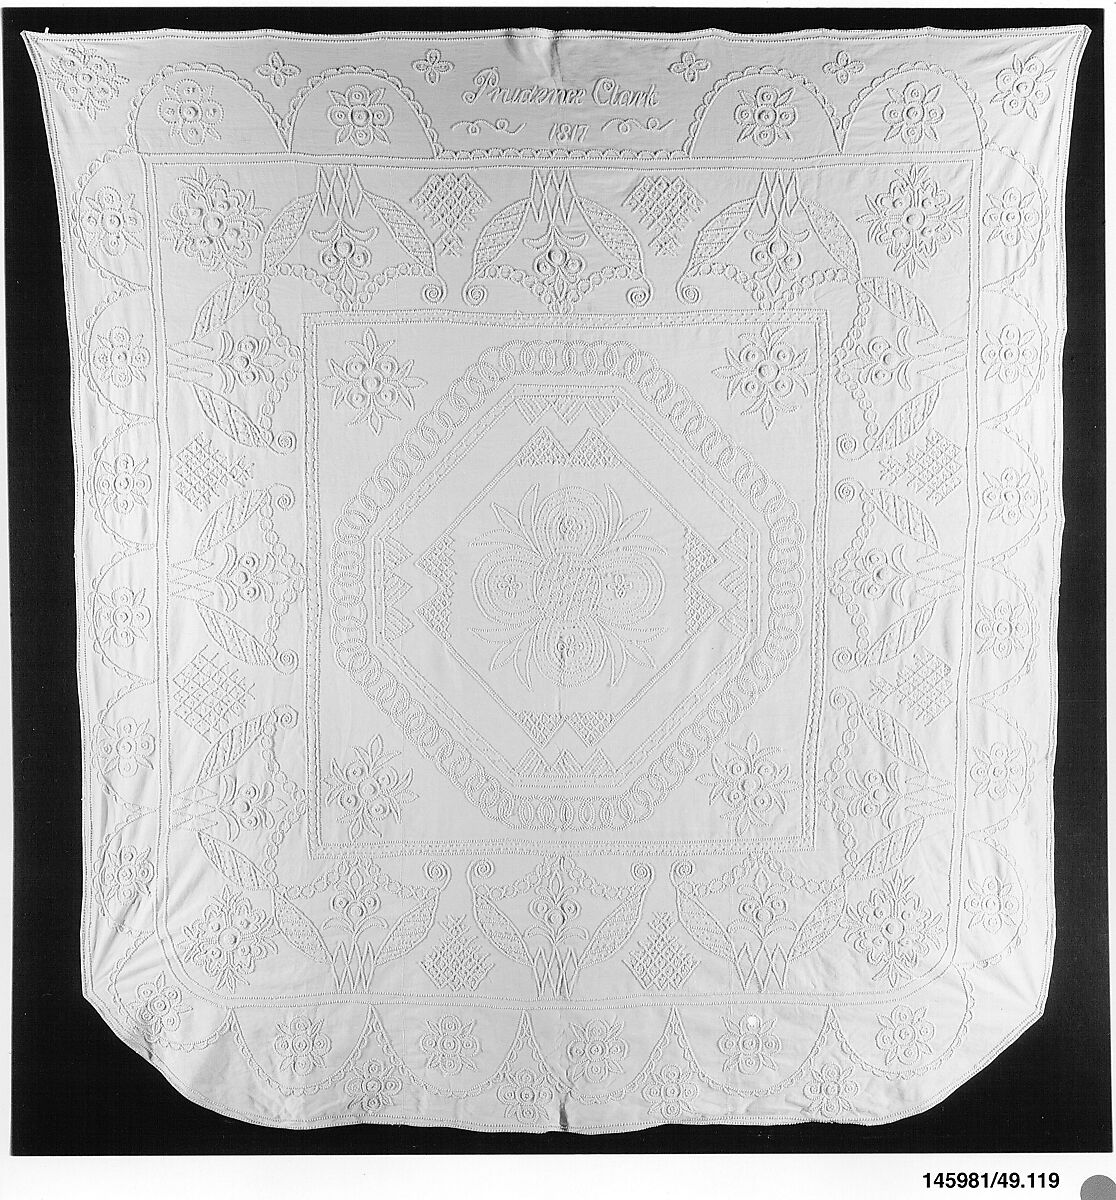 Embroidered whitework coverlet, Prudence Clark, Cotton/linen embroidered with cotton thread, American 